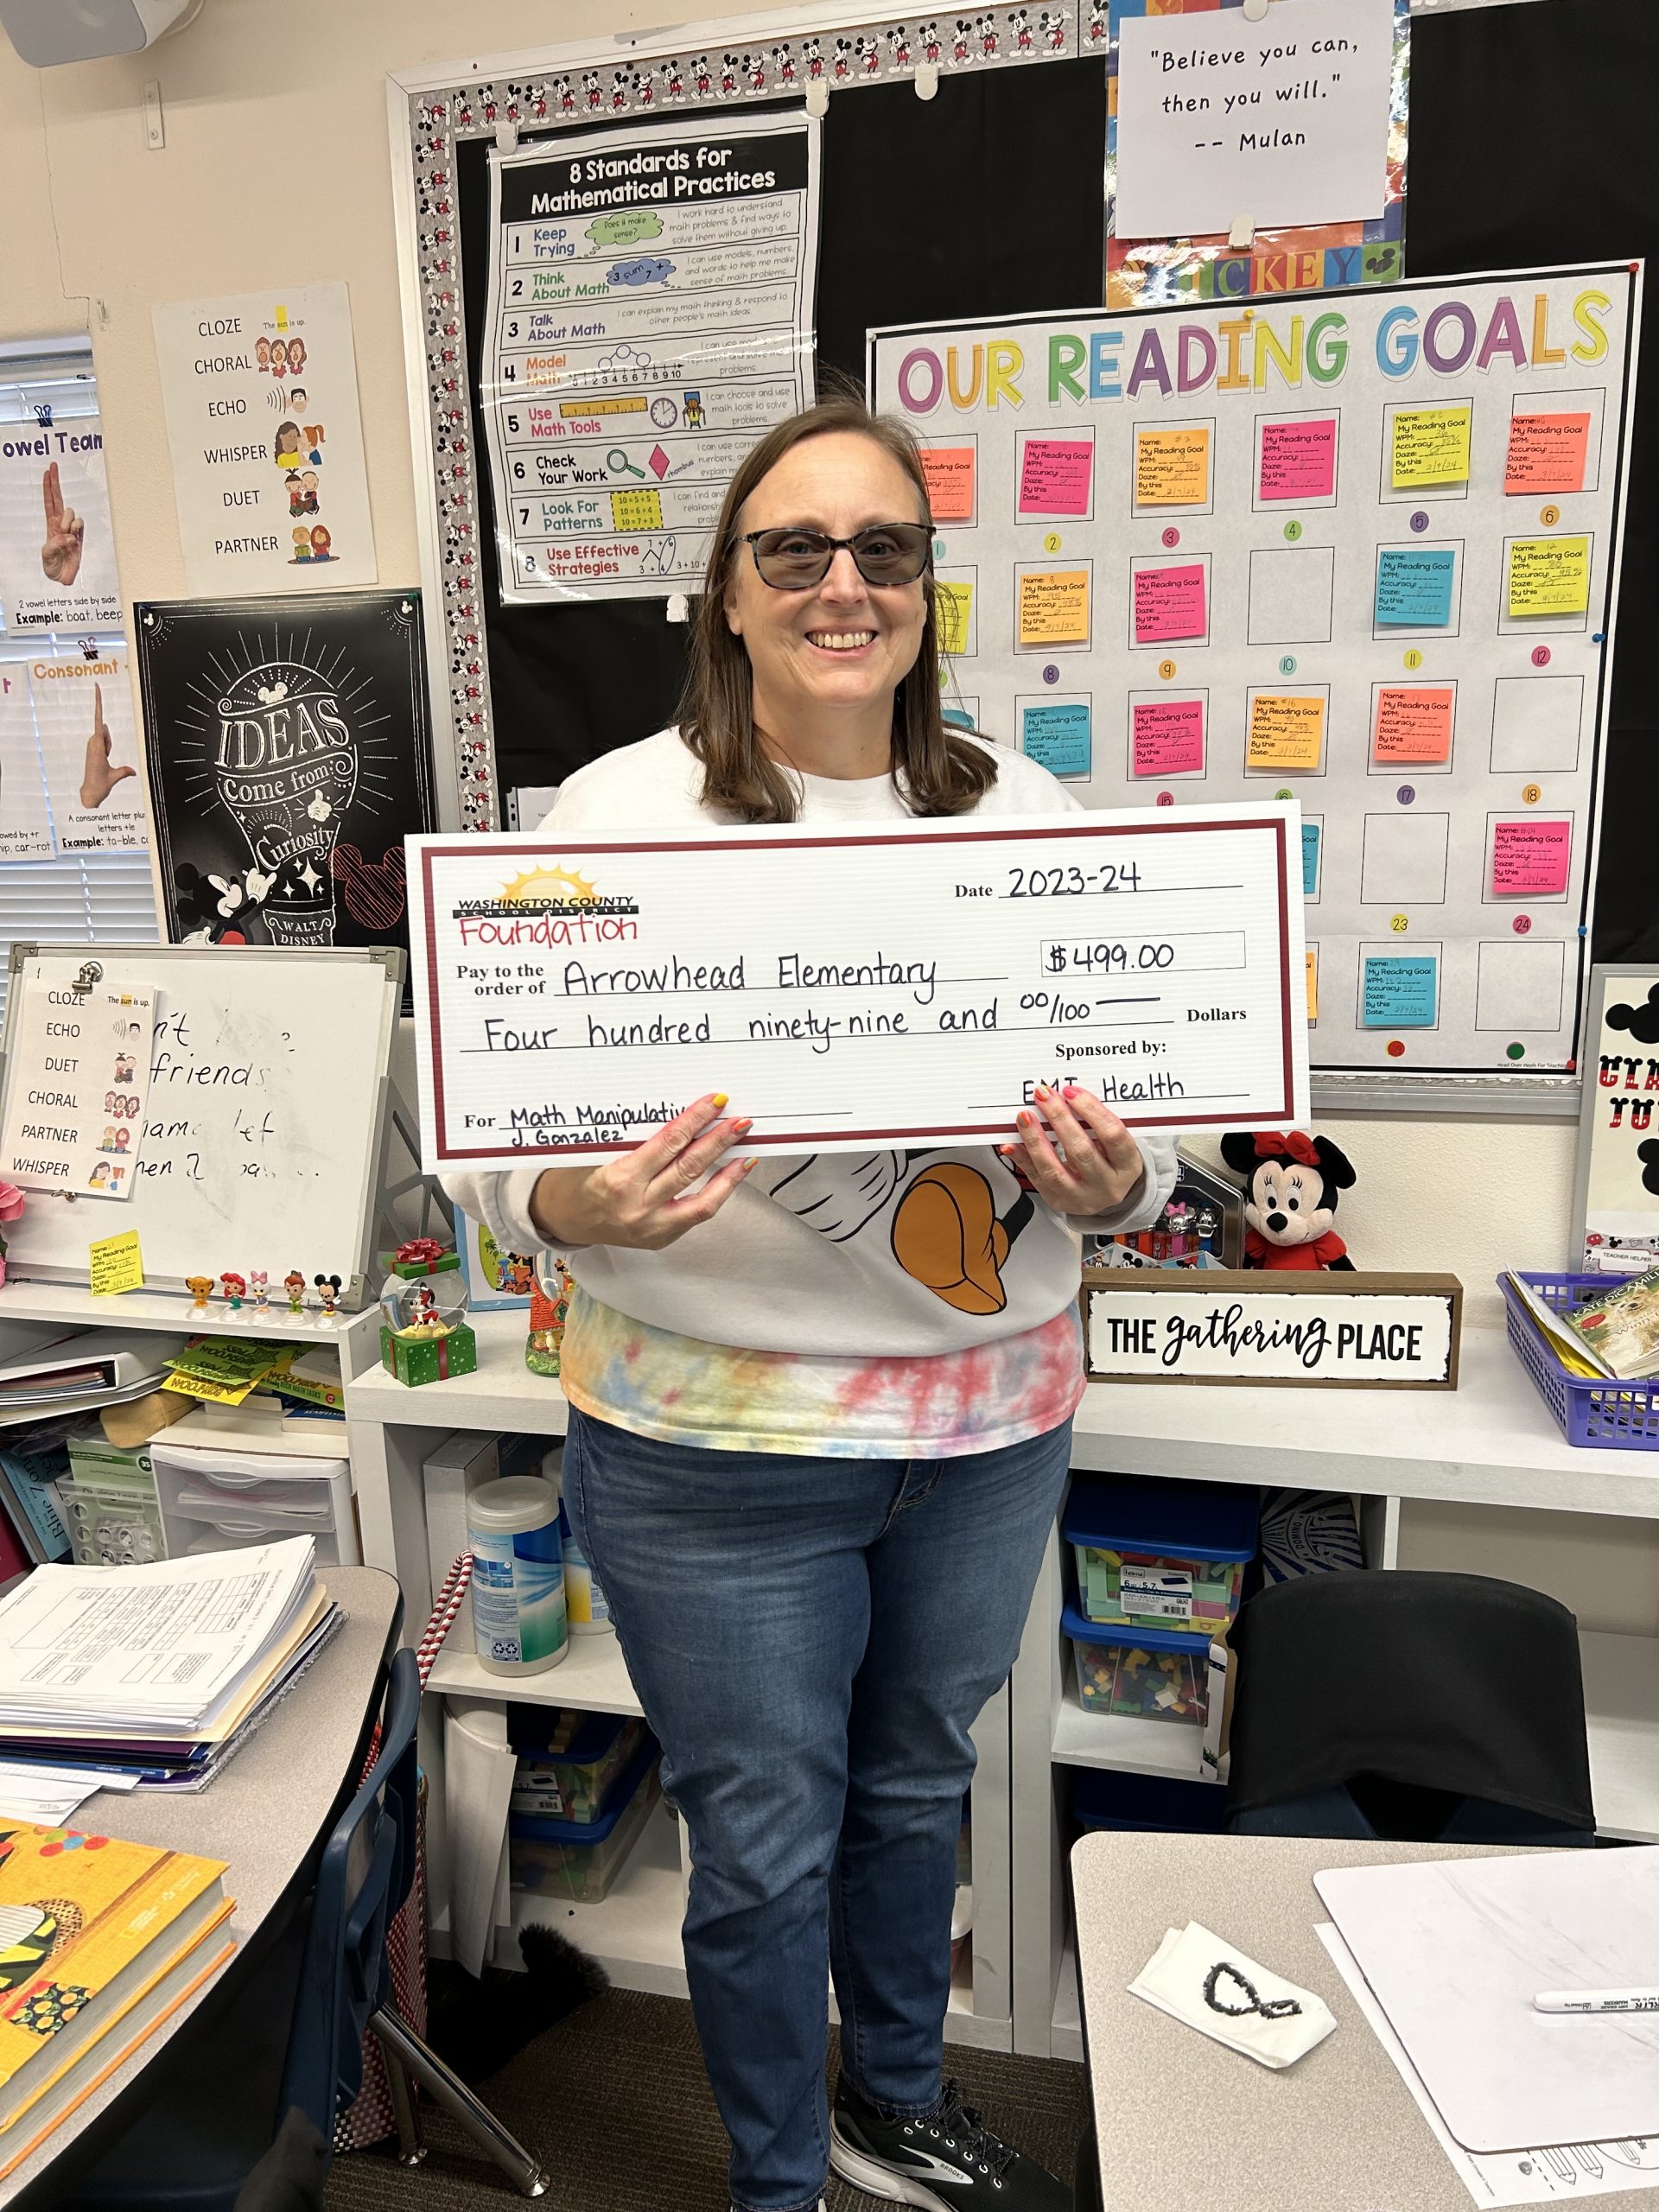 Mrs. Gonzalez received a Foundation Grant for the 2023-24 school year. Thank you, EMI Health for the new math manipulatives for our class.